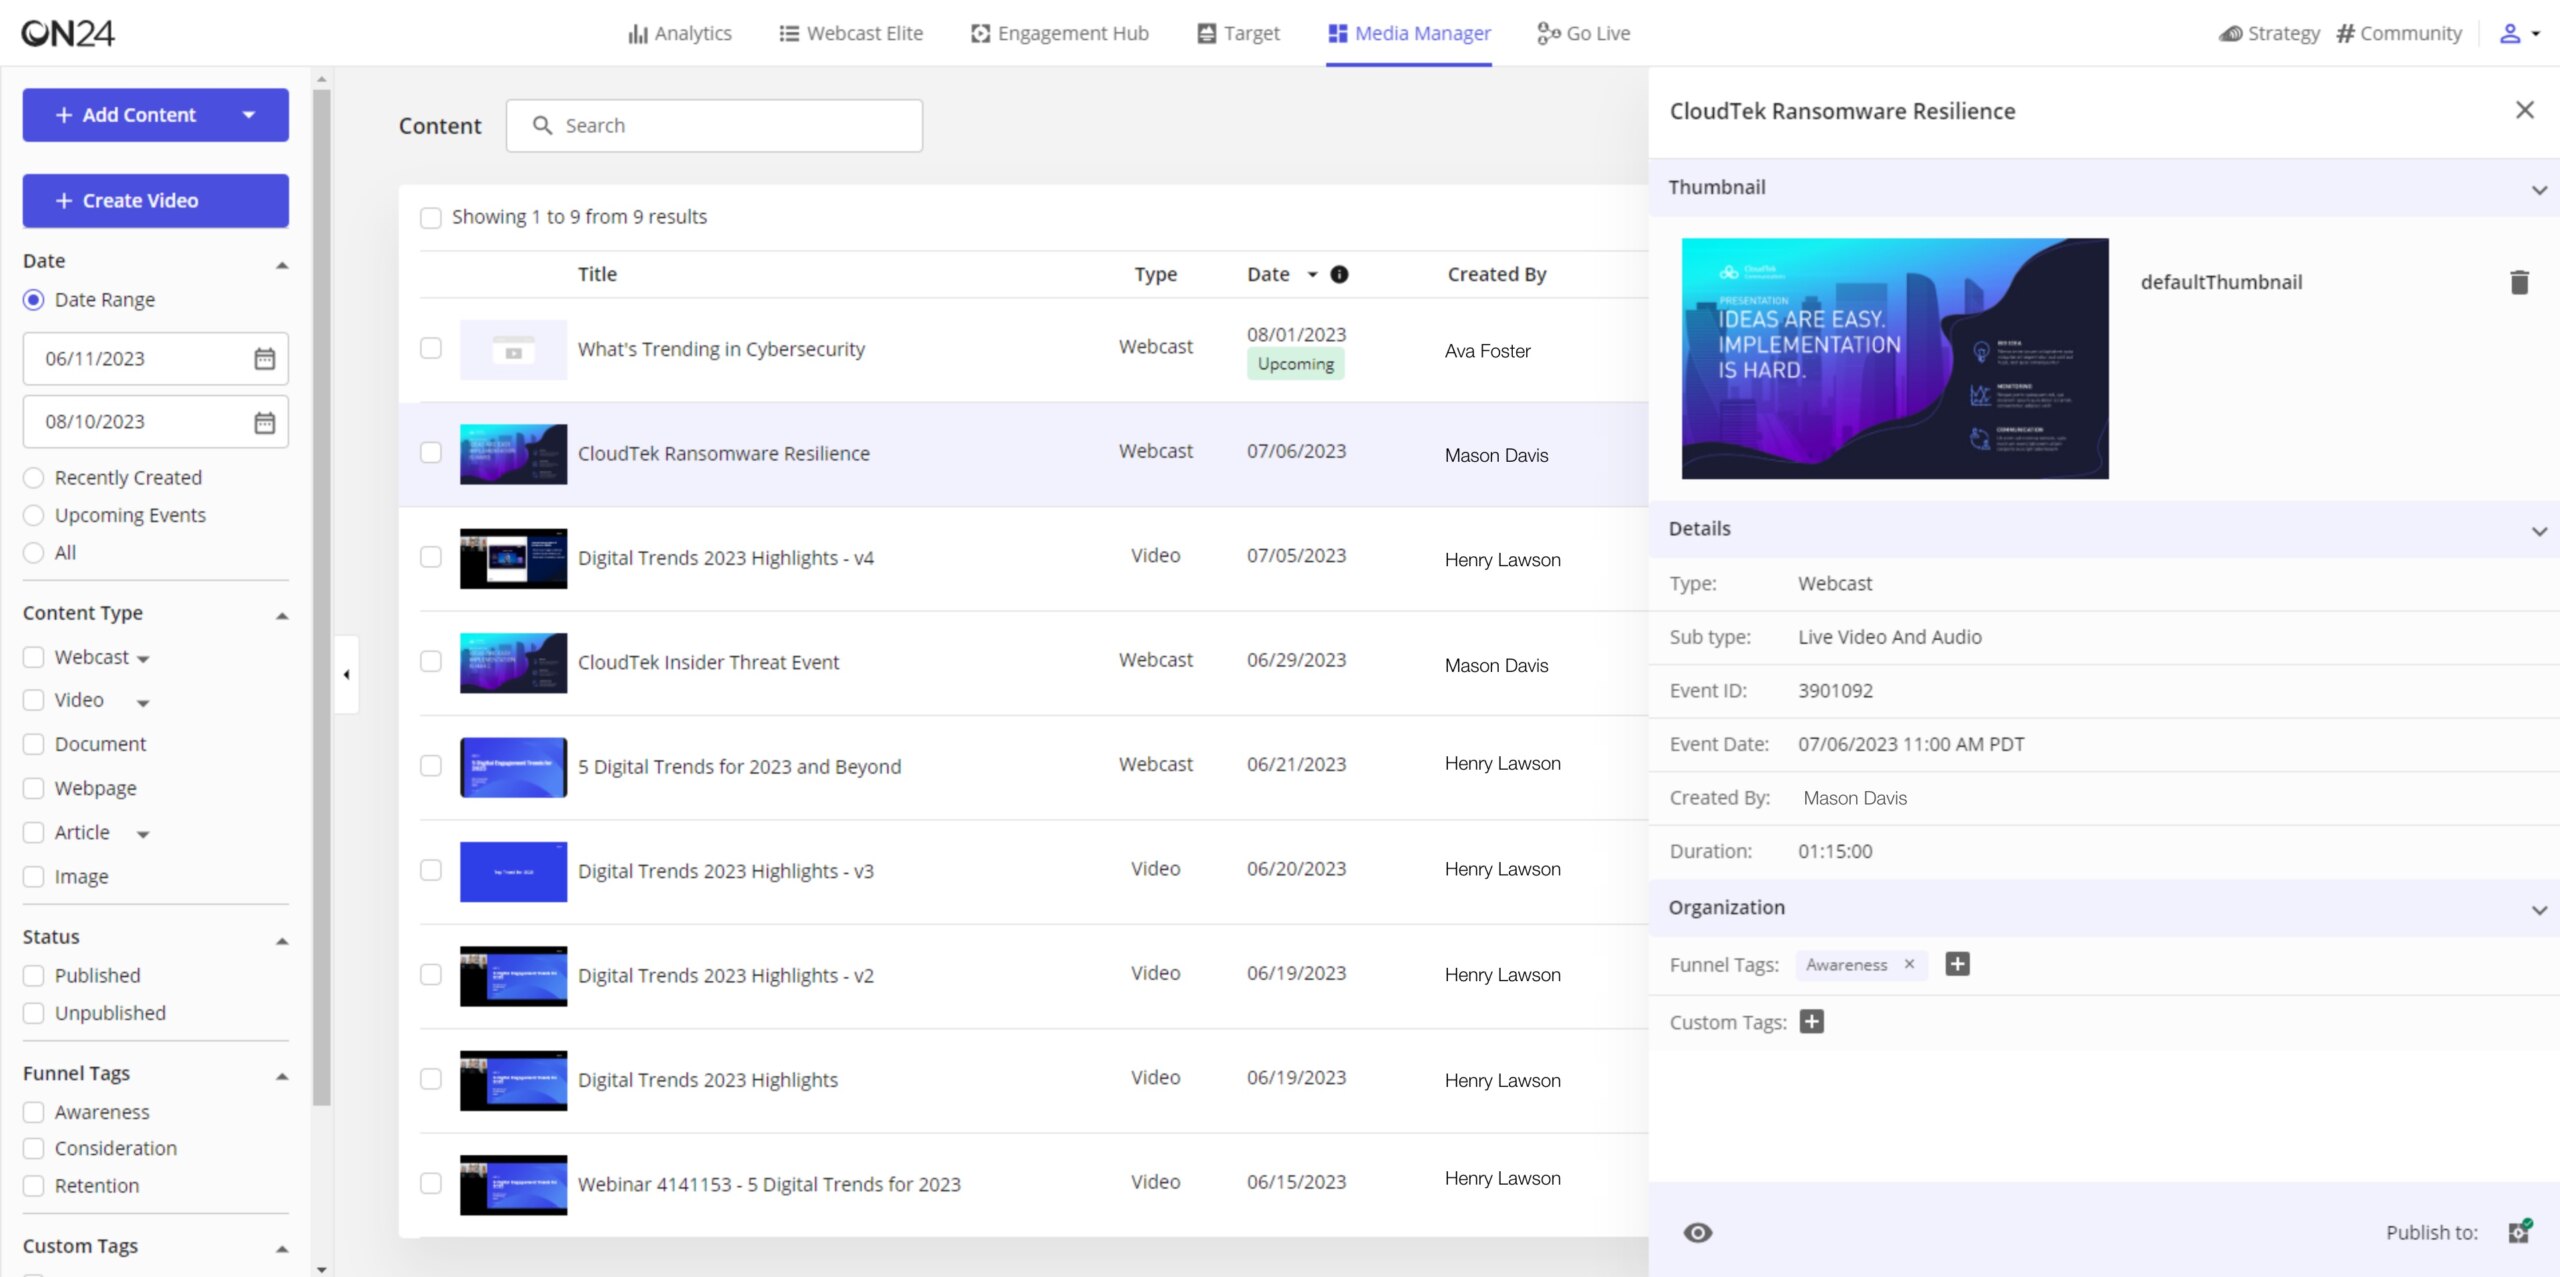 Yahoo Mail Software Reviews, Demo & Pricing - 2023